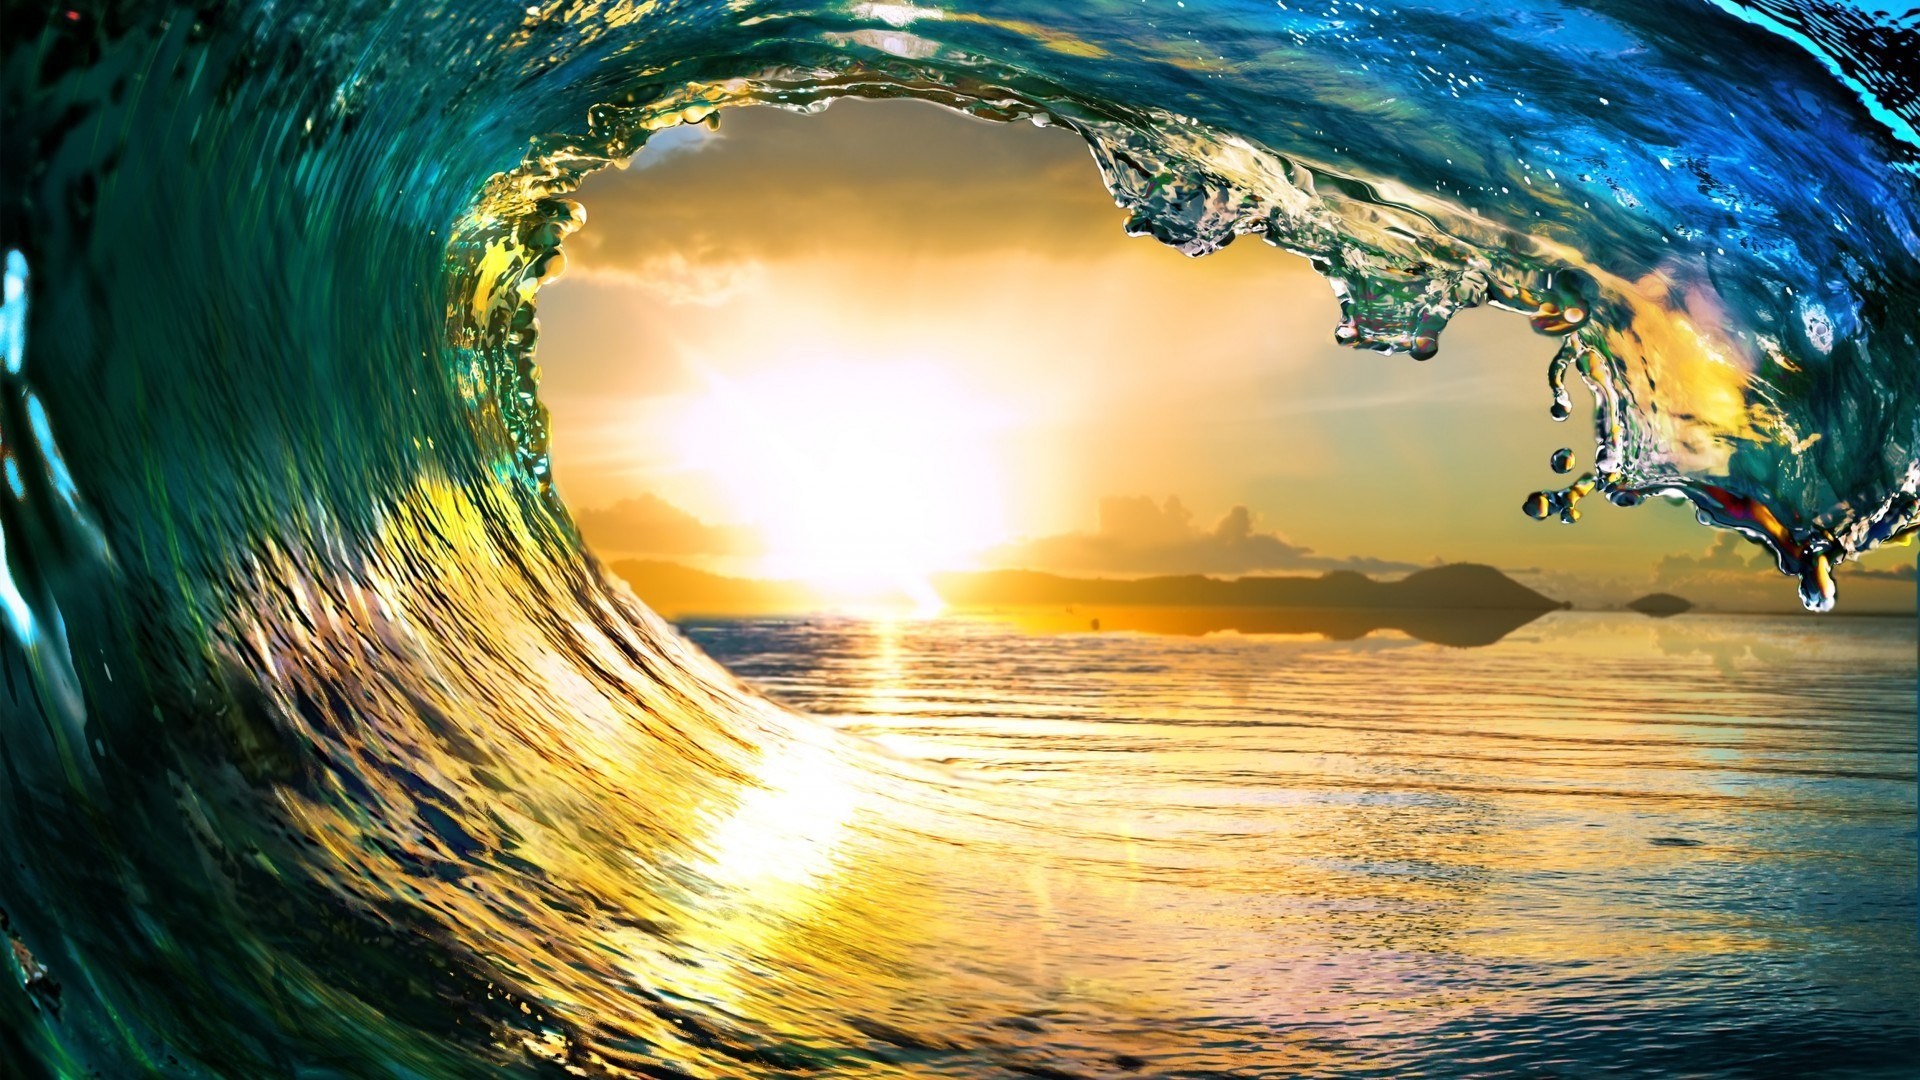 1920x1080 Free Ocean Waves Sunset Nature, computer desktop wallpapers, pictures,  images